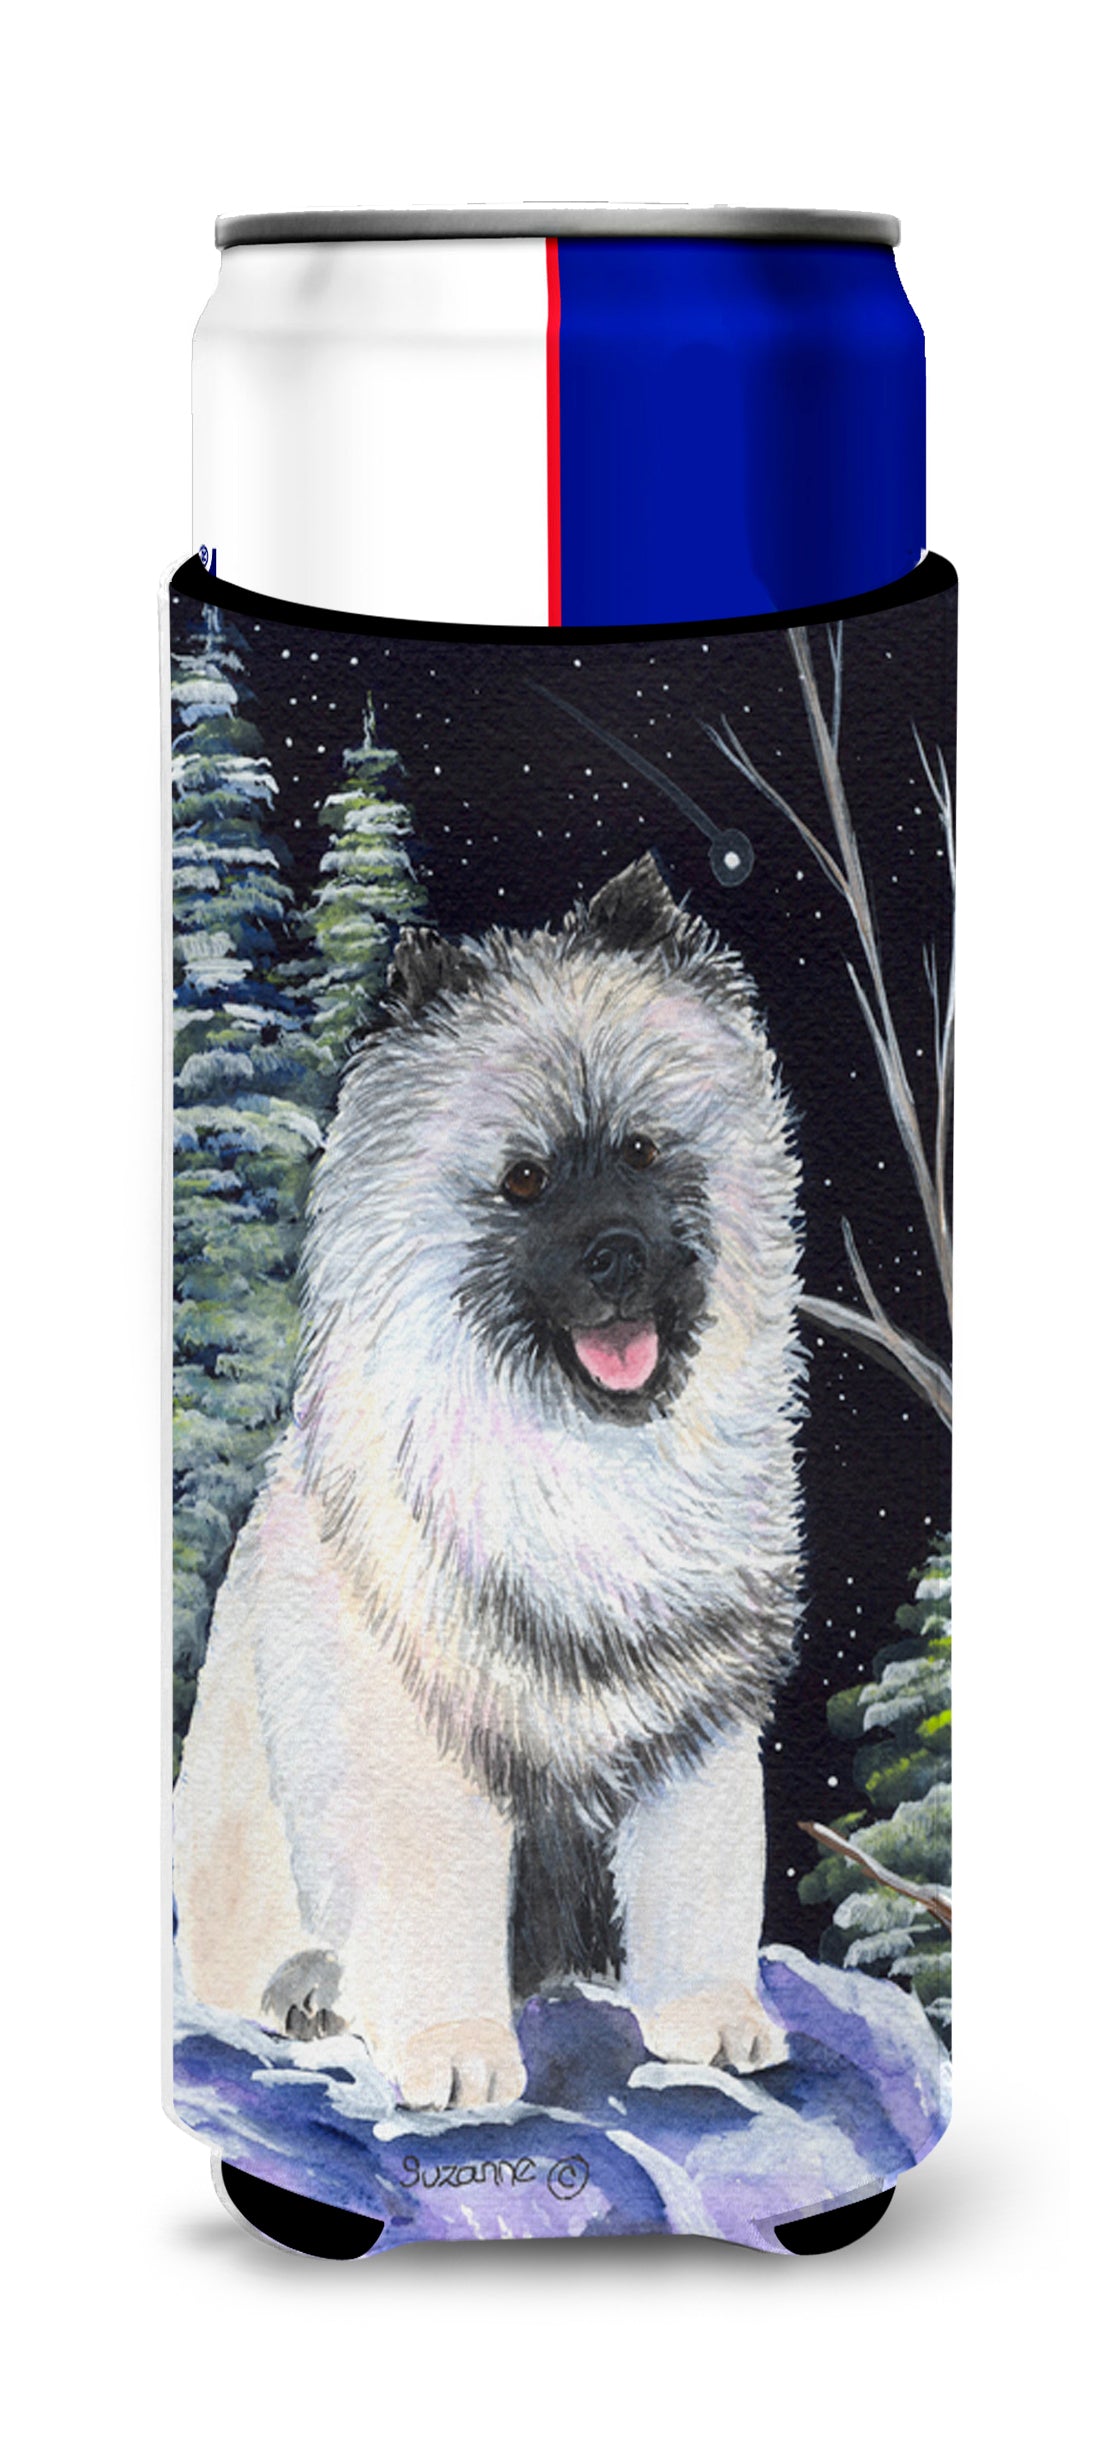 Starry Night Keeshond Ultra Beverage Insulators for slim cans SS8404MUK